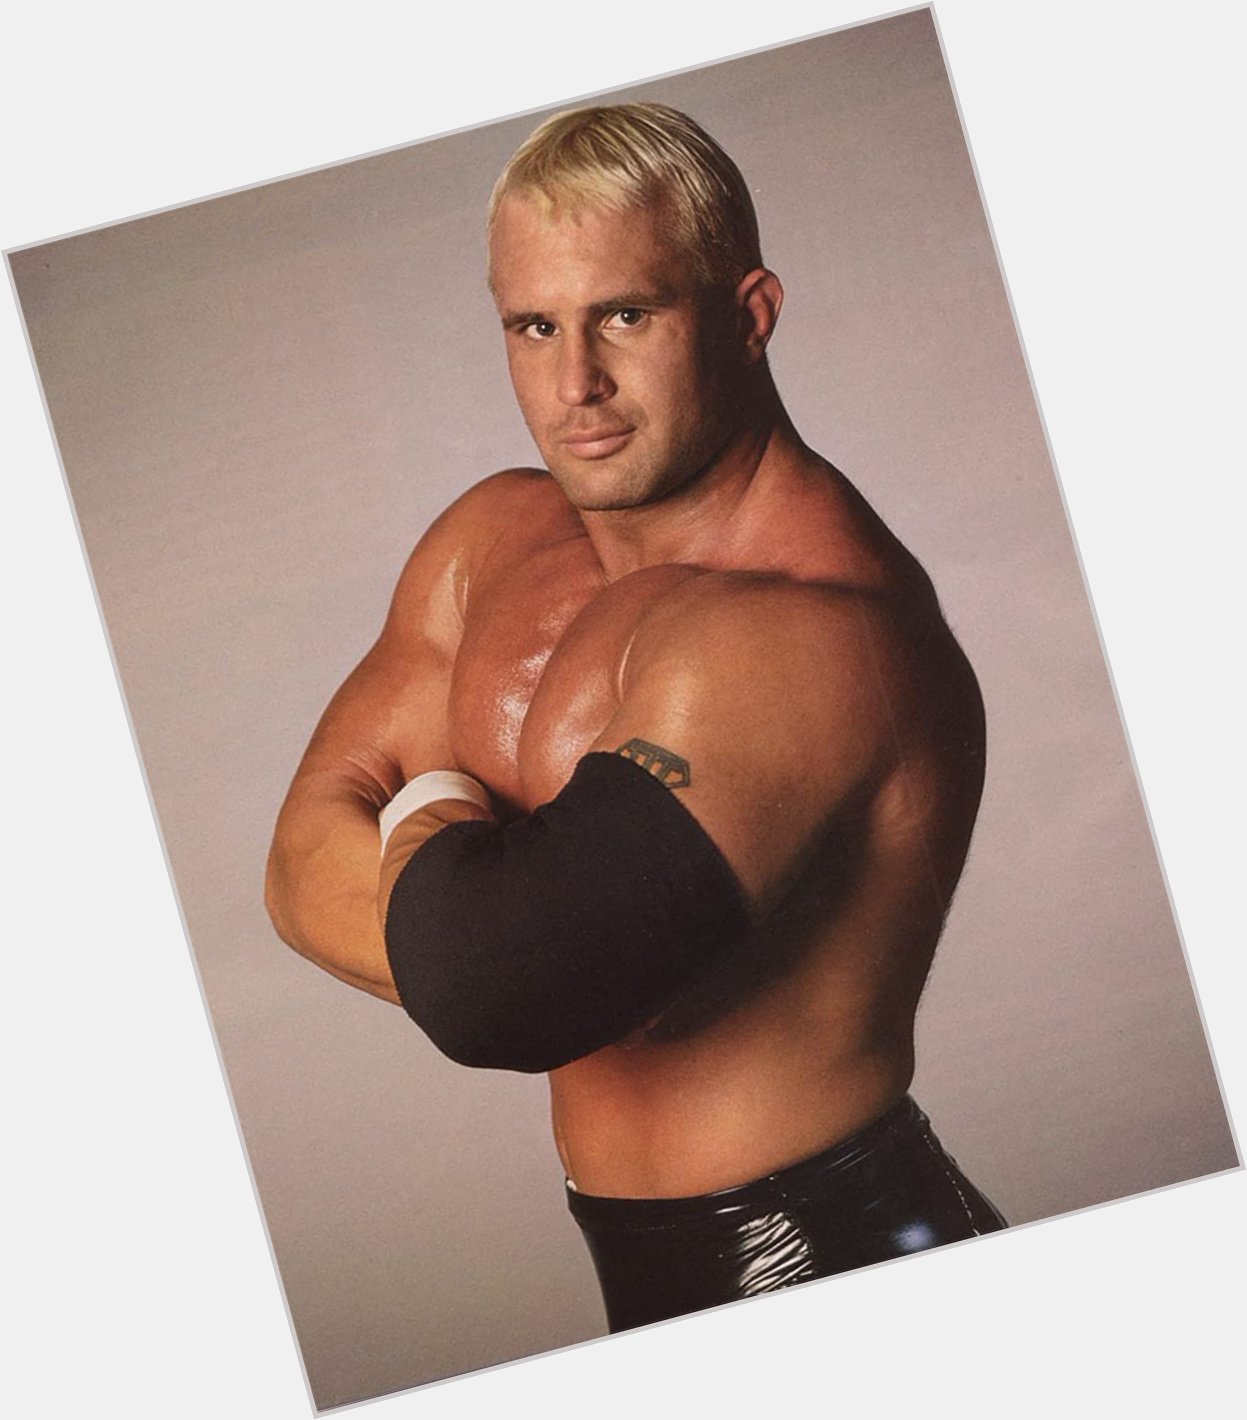 Happy birthday to the late Chris Candido. 